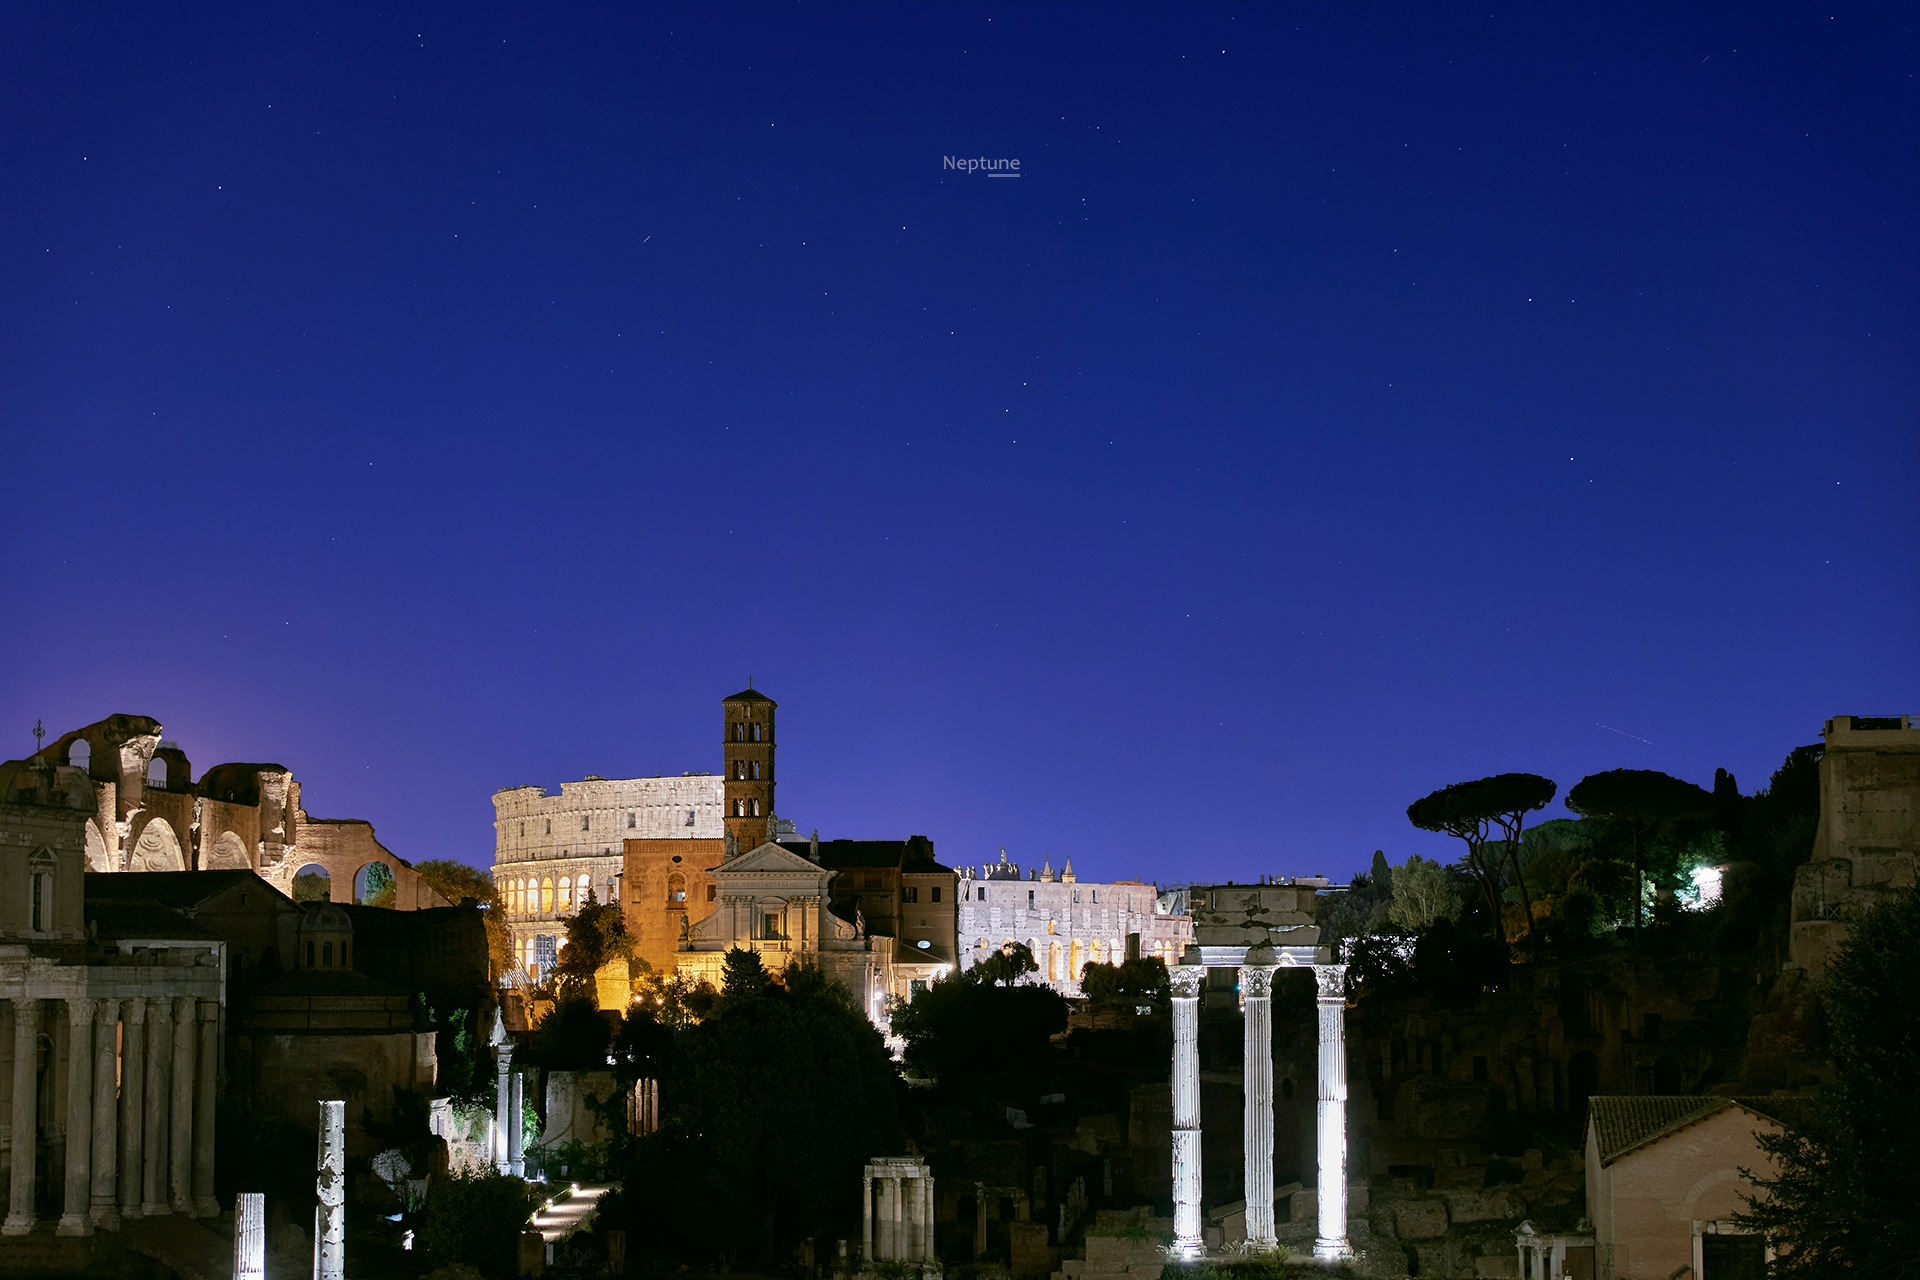 Planet Neptune is visible above the Colosseum and the Roman Forum - 28 Aug. 2018